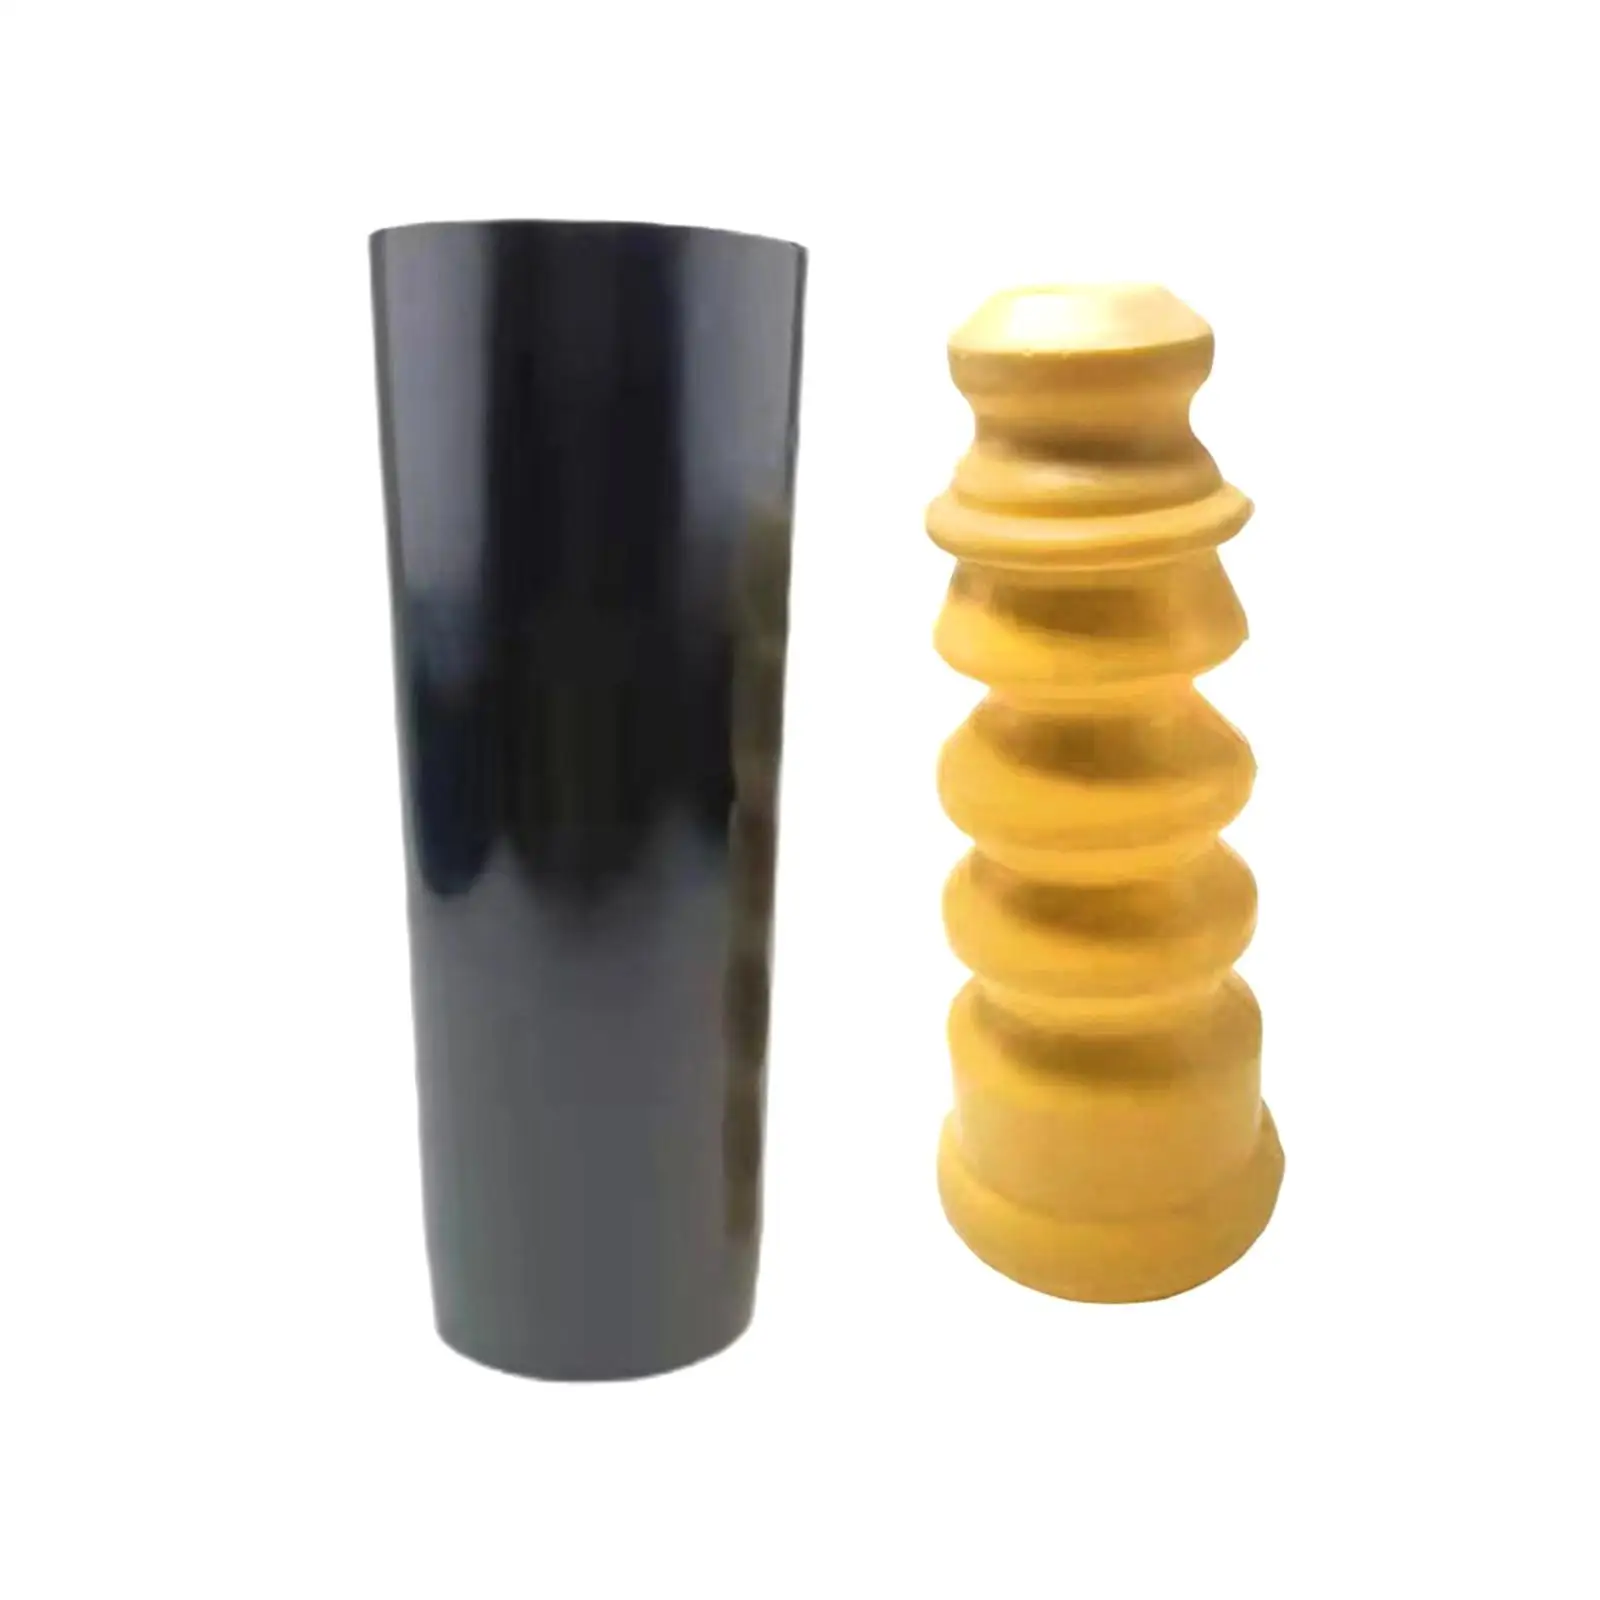 Rear Strut Bump Stop with Dust Cover Rubber 1J0513425A 1305638 1J0512131B for VW Golf Jetta MK4 High Quality Accessories